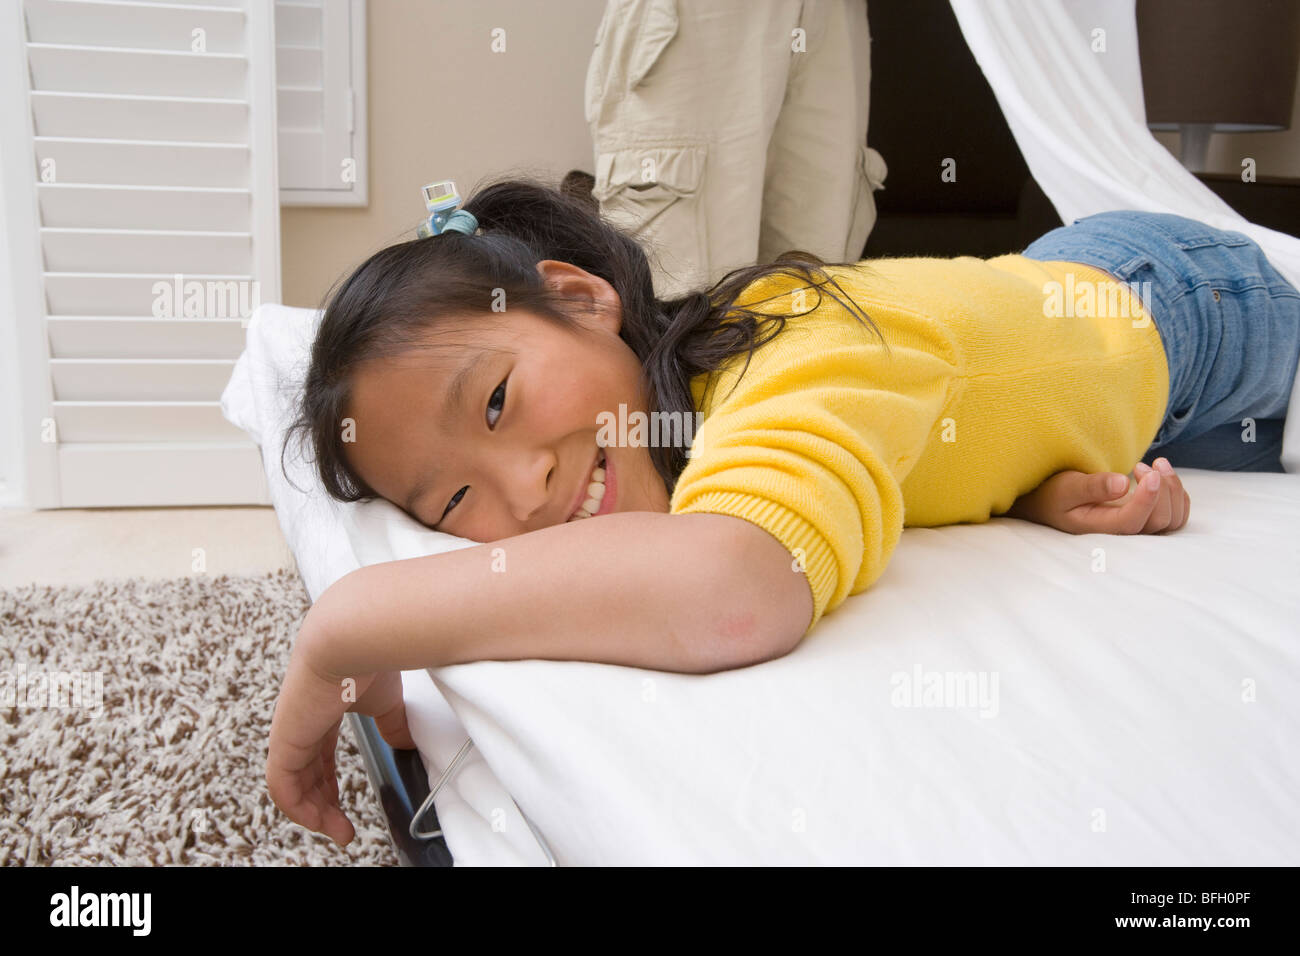 Girl lying down on bed and smiling Banque D'Images